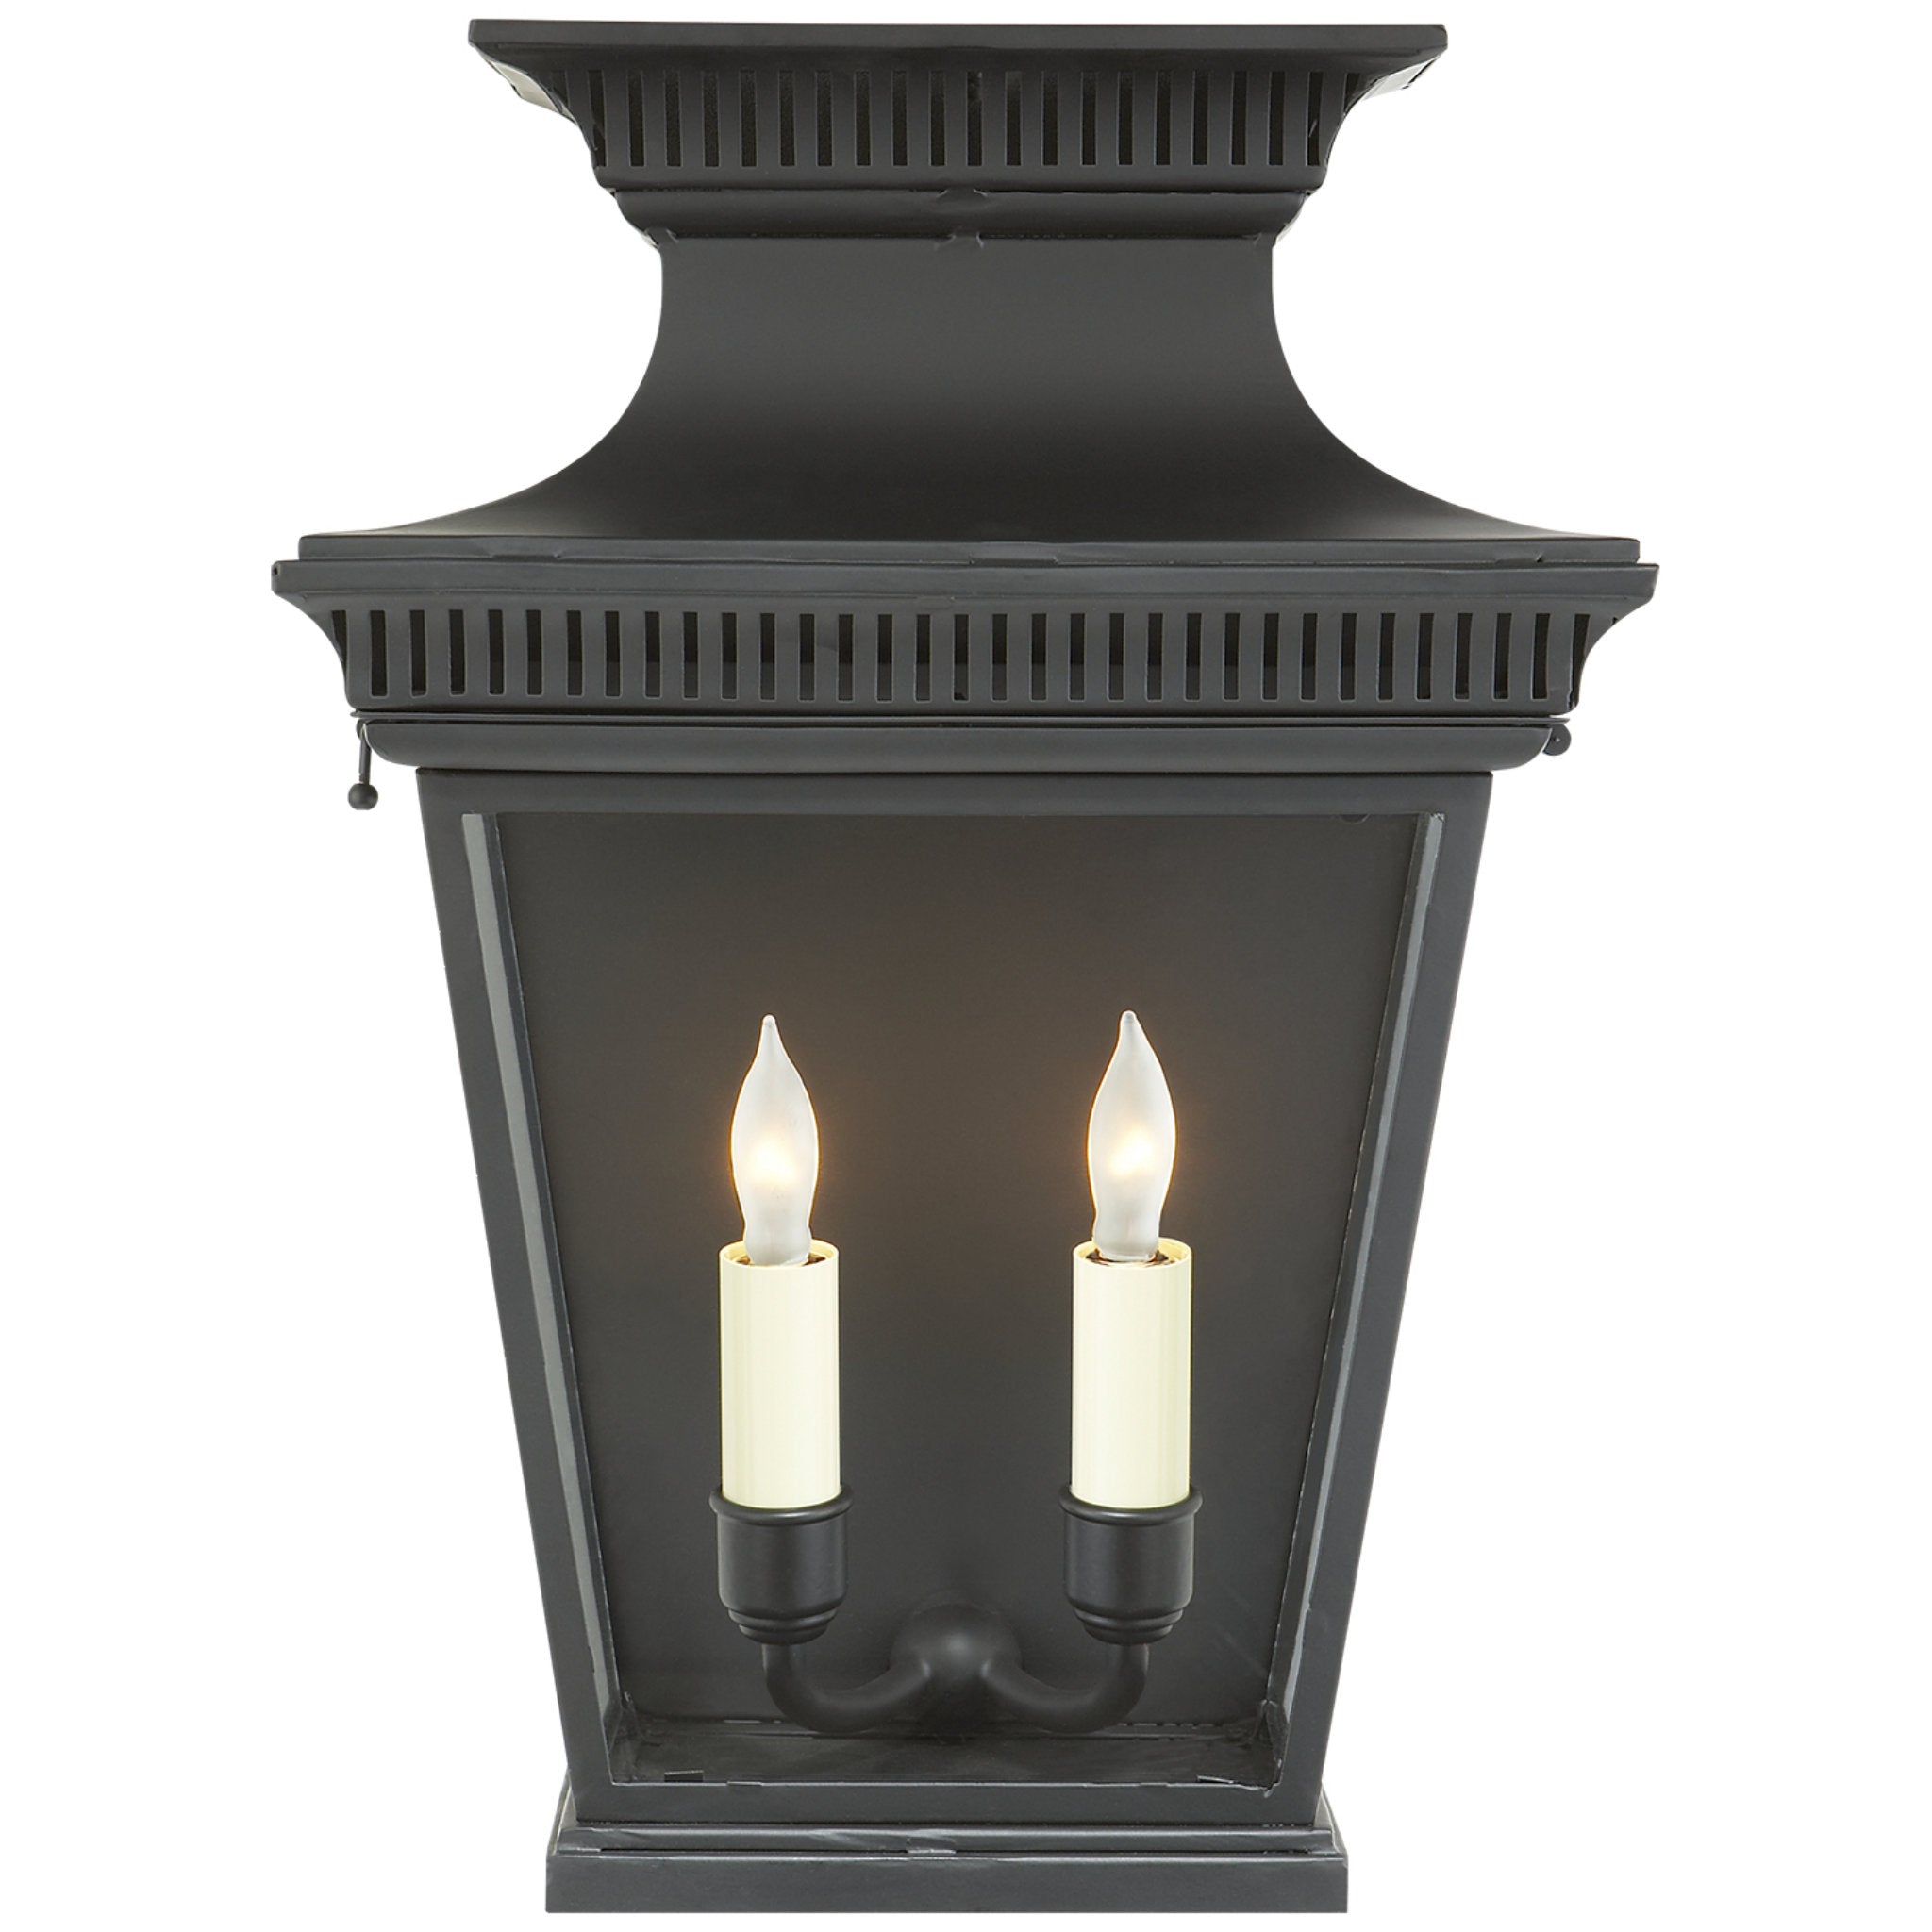 Chapman & Myers Elsinore Medium 3/4 Wall Lantern in Black with Clear Glass